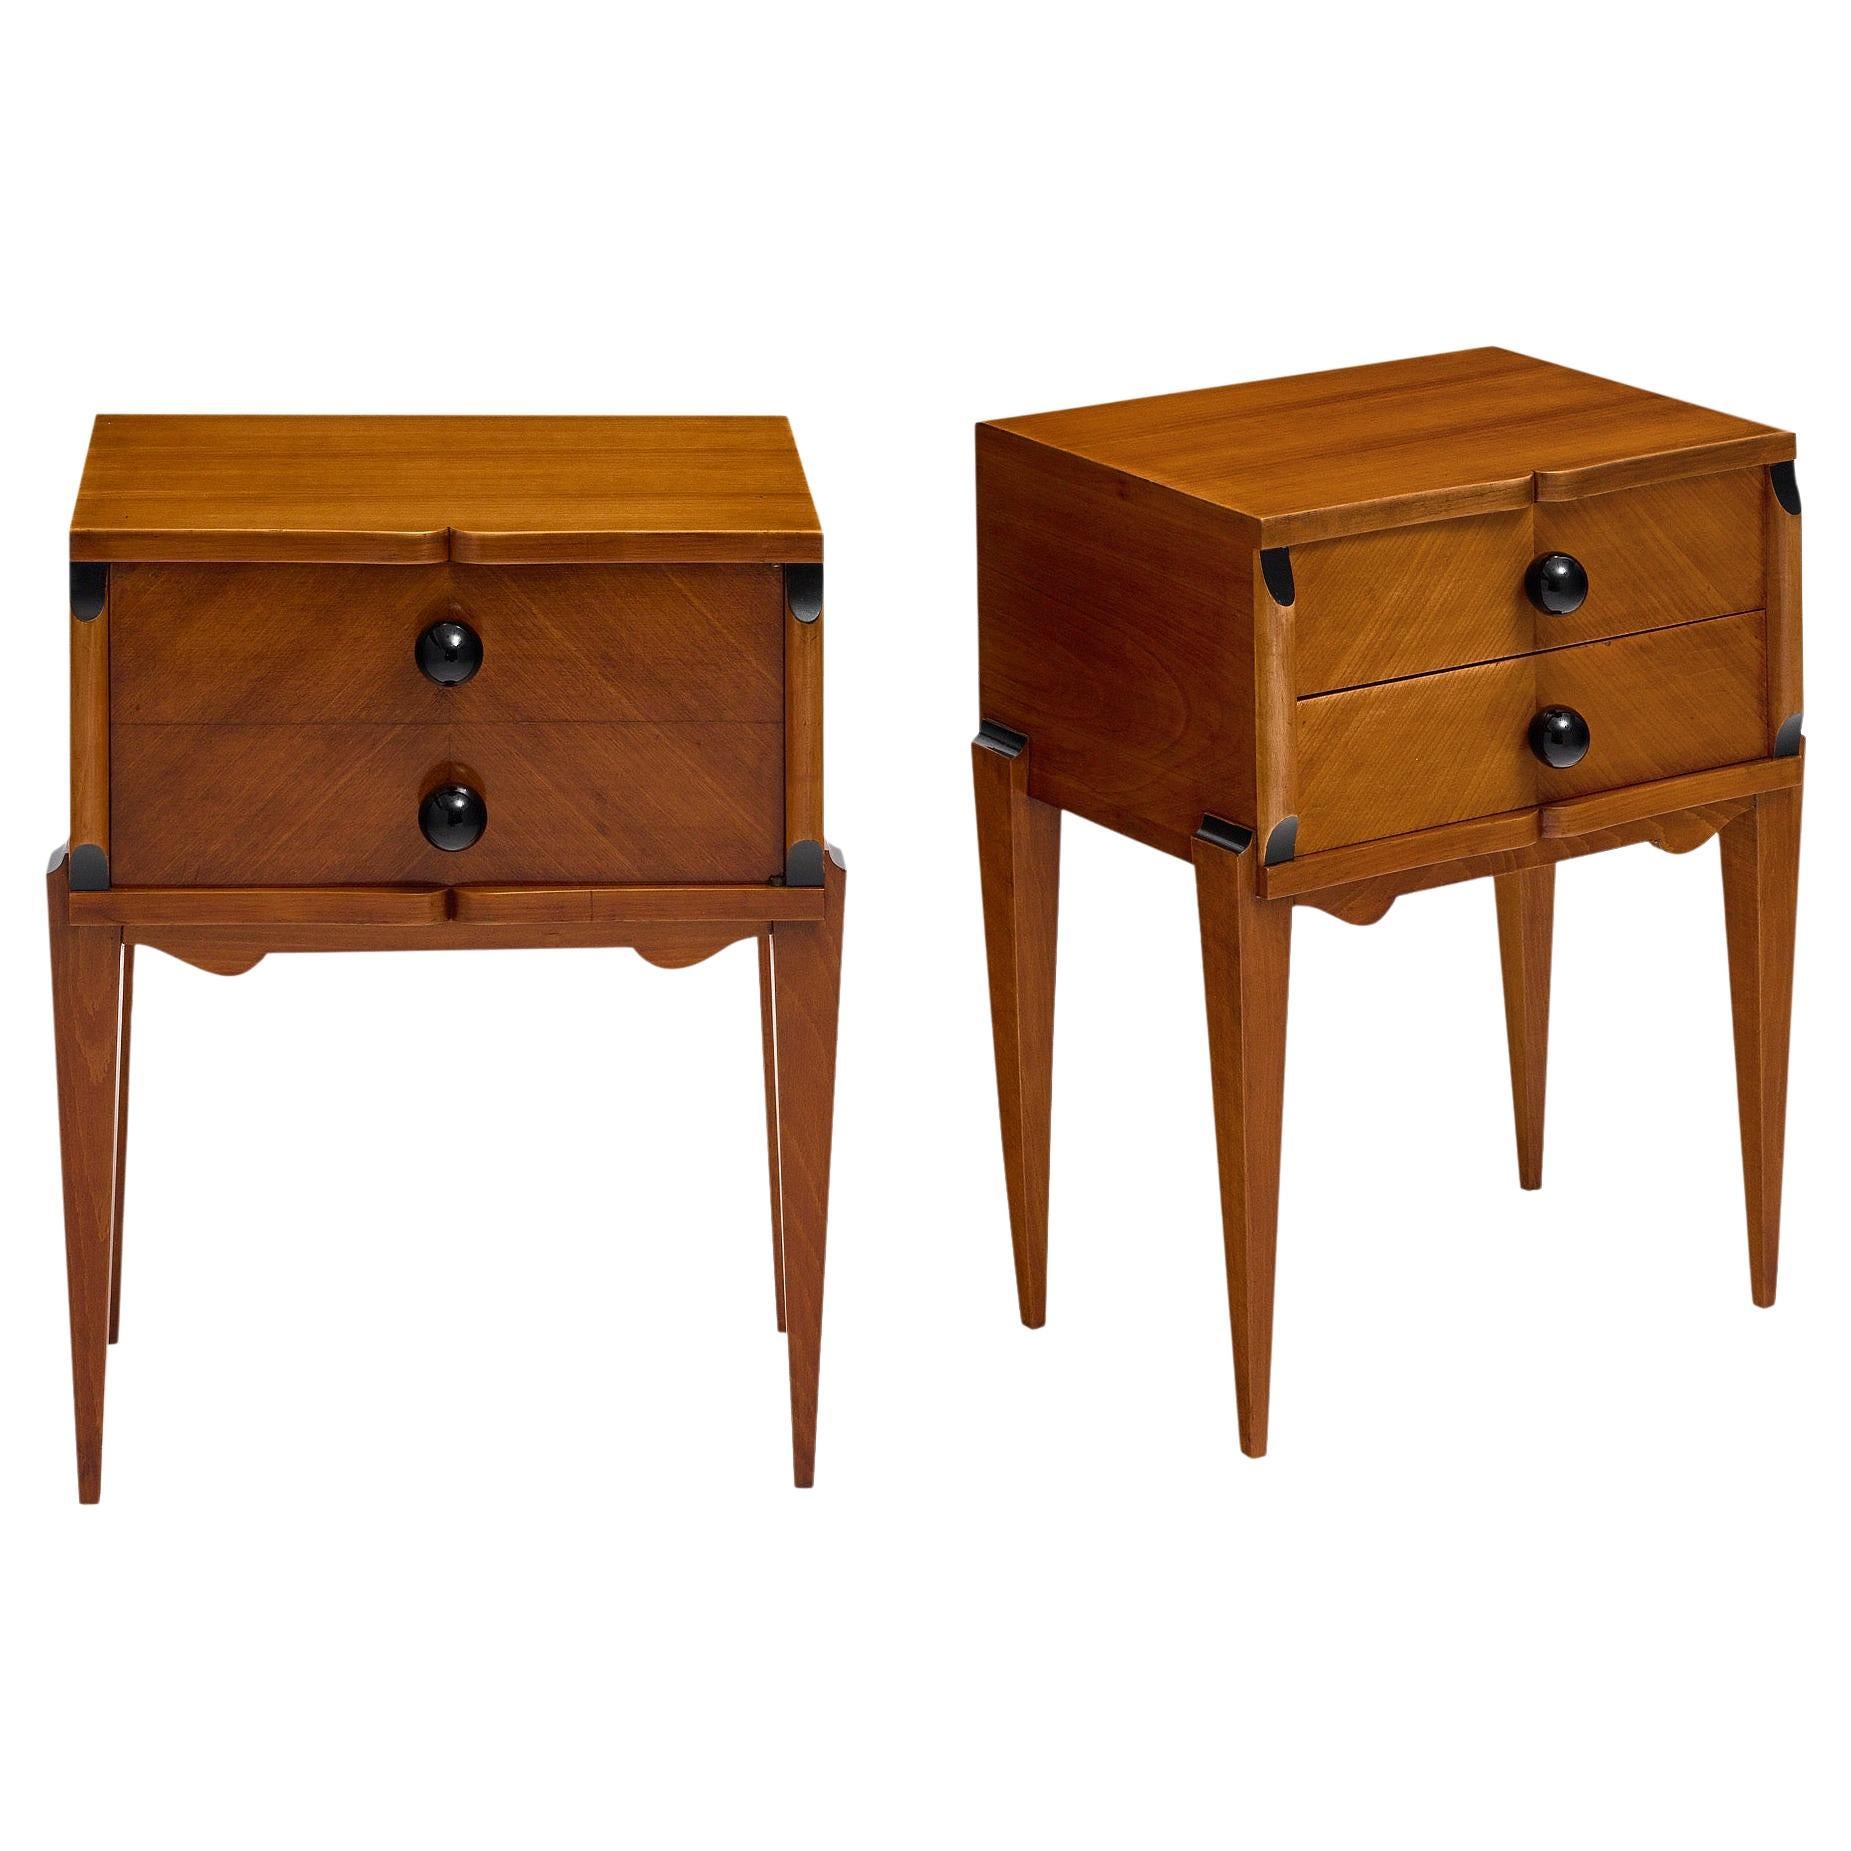 French Art Deco Period Side Tables For Sale